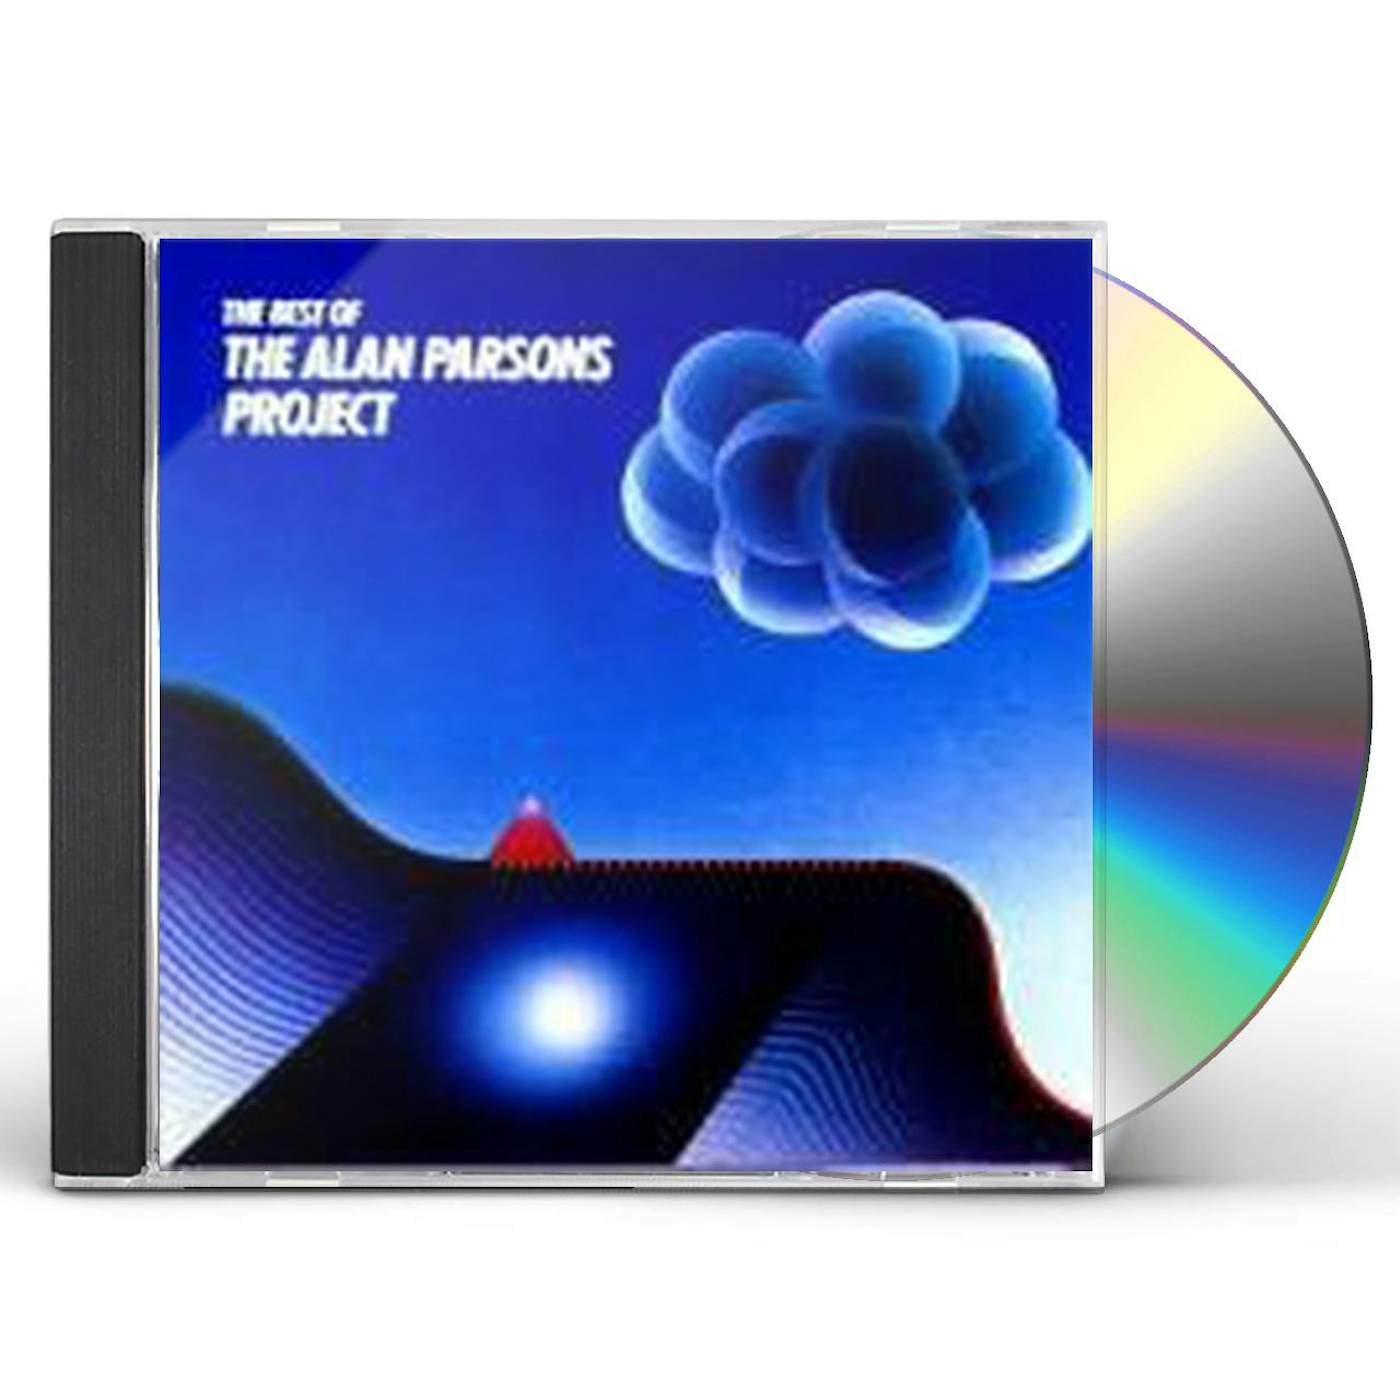 BEST OF THE ALAN PARSONS PROJECT CD